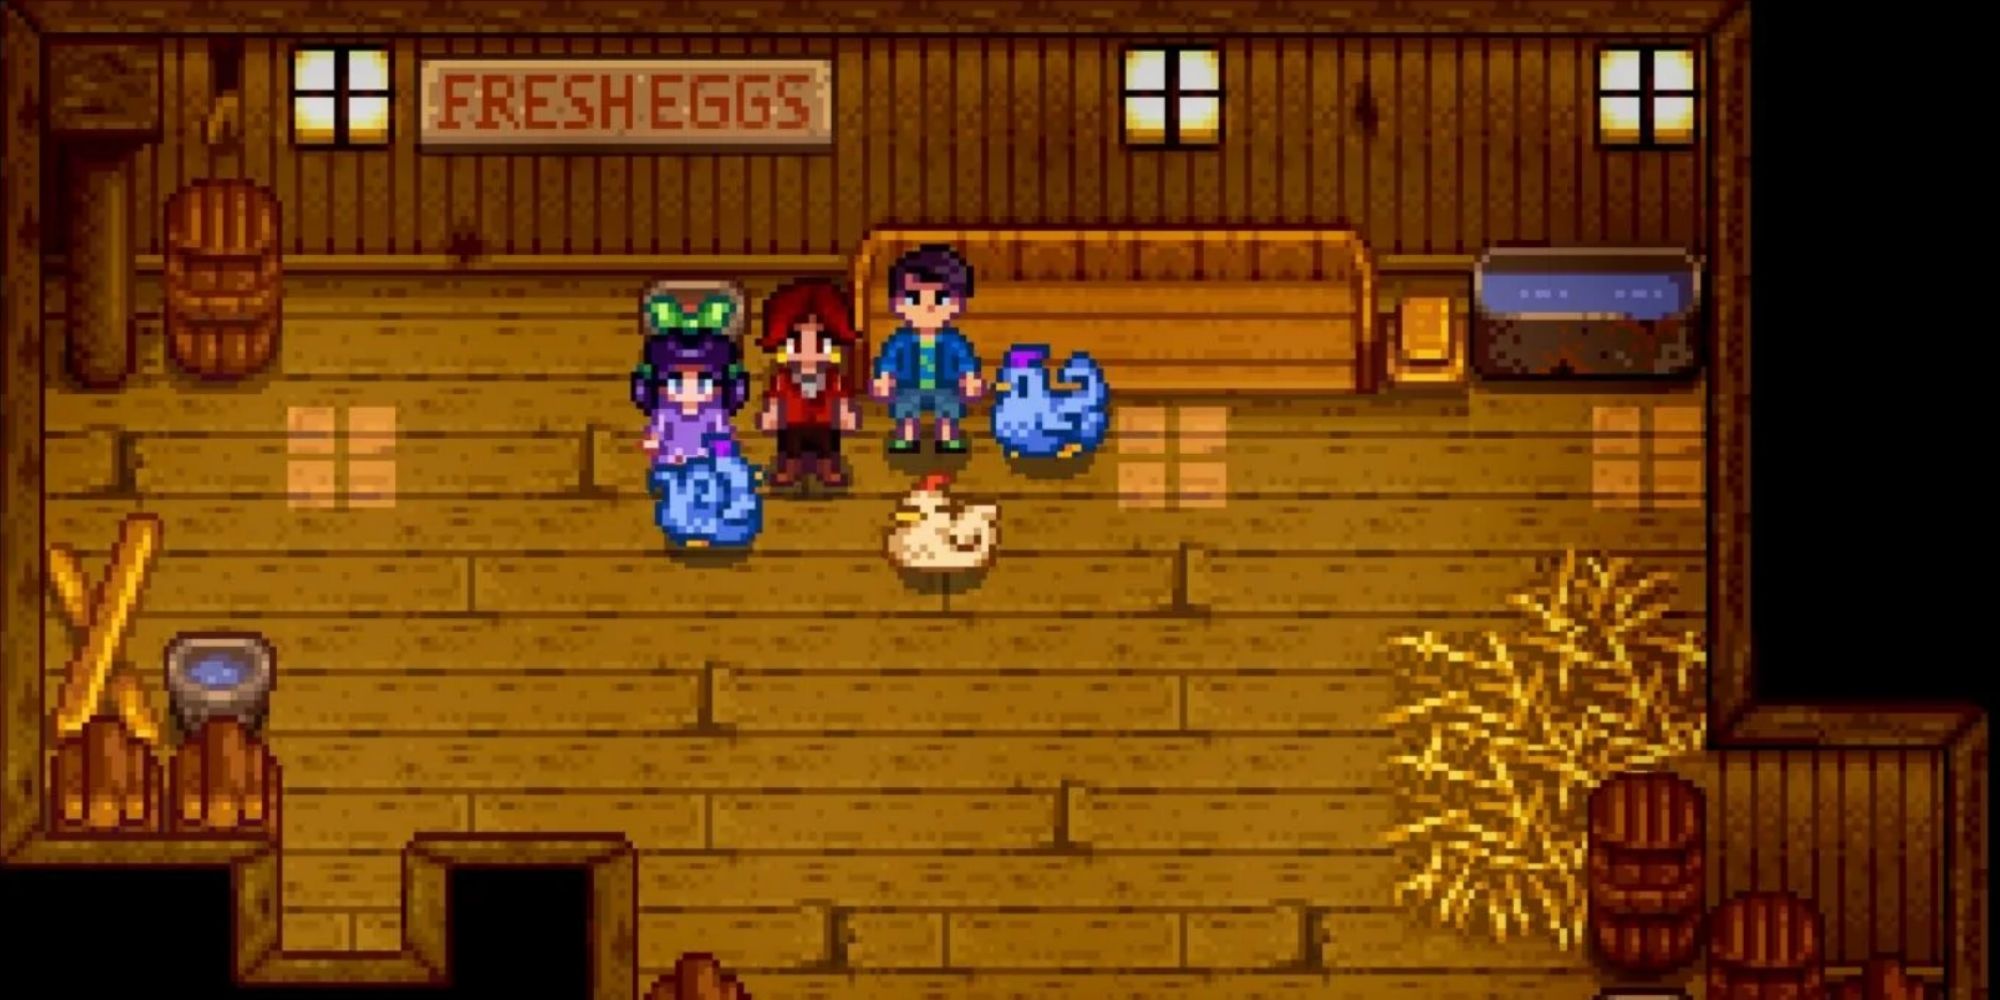 Shane, the player, and Jaz in the middle of his barn with his new blue chickens